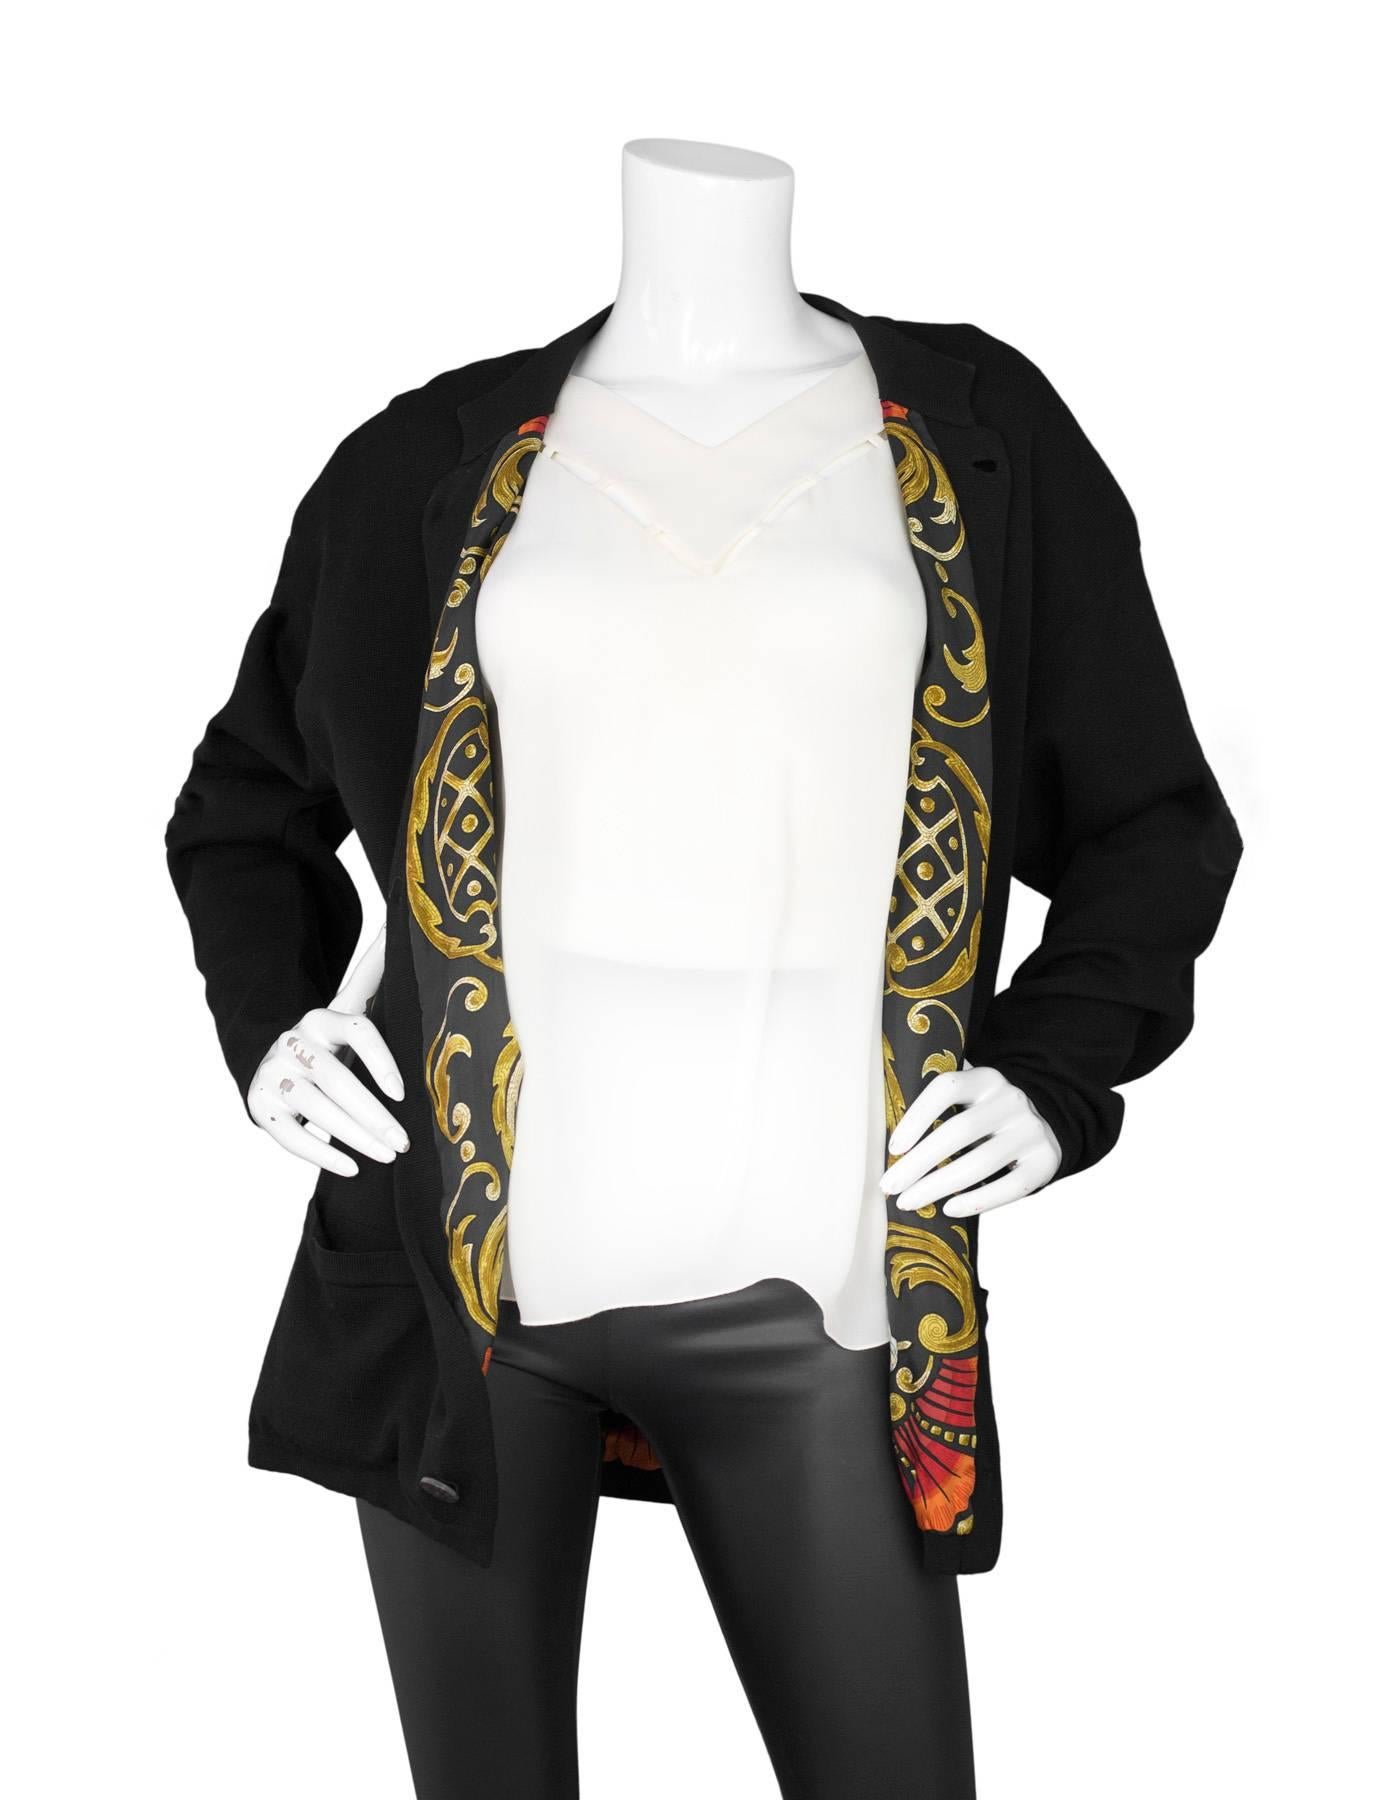 Hermes Black Cotton Knit Cardigan Sweater 
Features multi-color printed silk lining

Color: Black
Composition: Believed to be a cotton-blend
Lining: Multi-colored silk-blend
Closure/Opening: Front button down closure
Exterior Pockets: Two hip patch